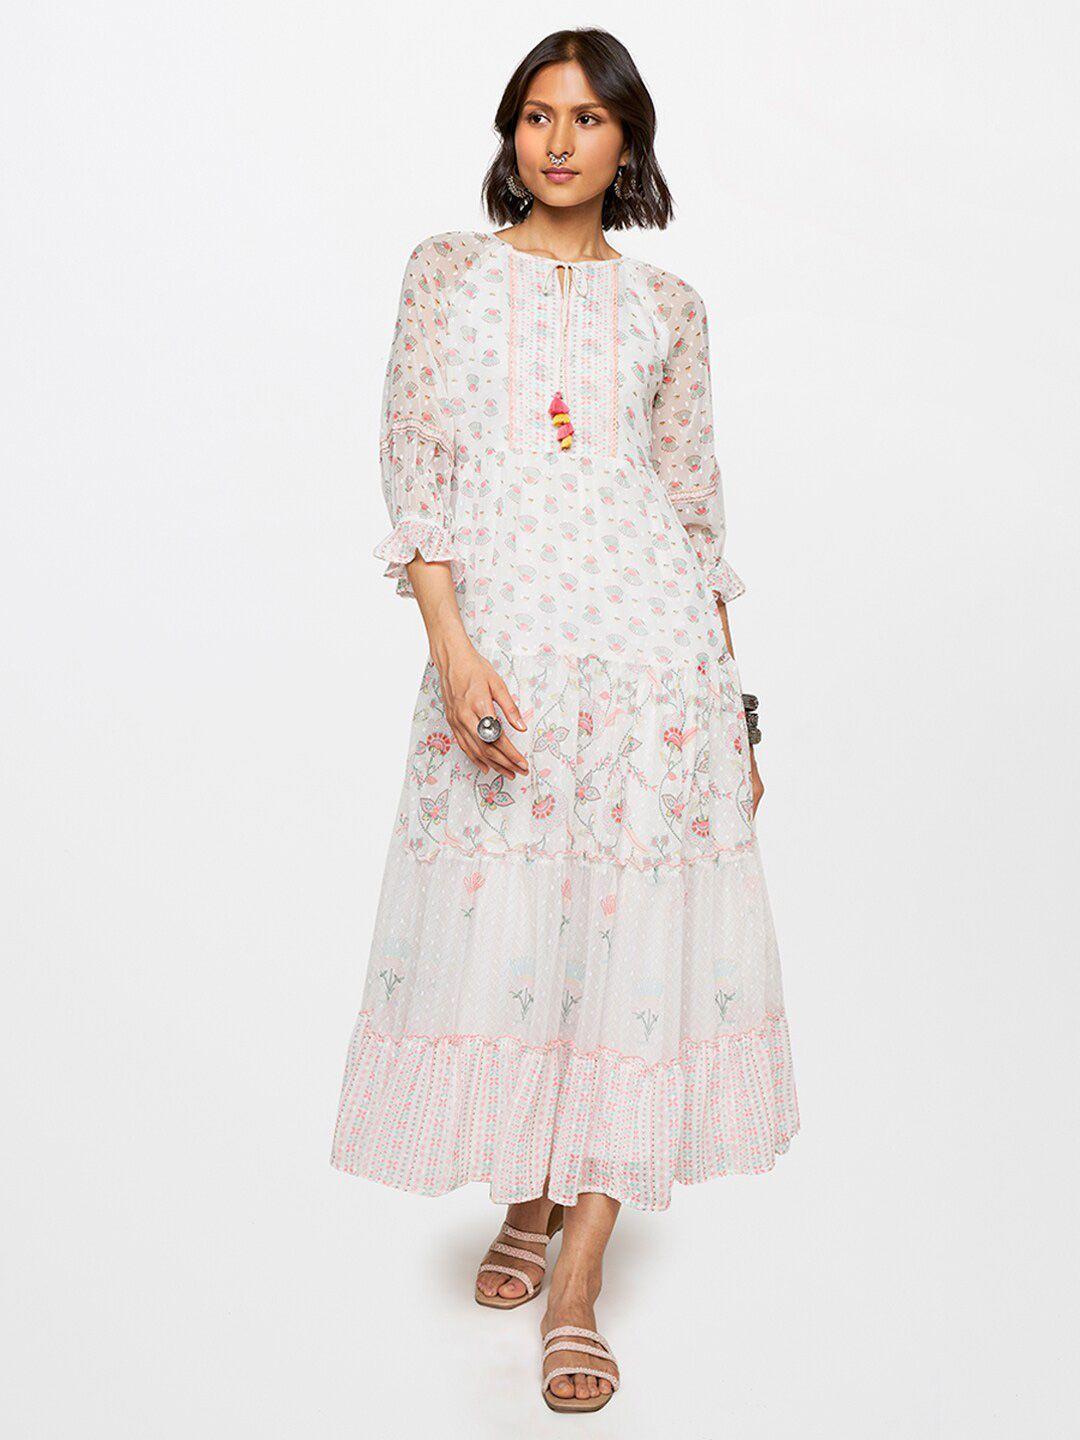 global desi floral printed tie-up neck tiered a-line dress